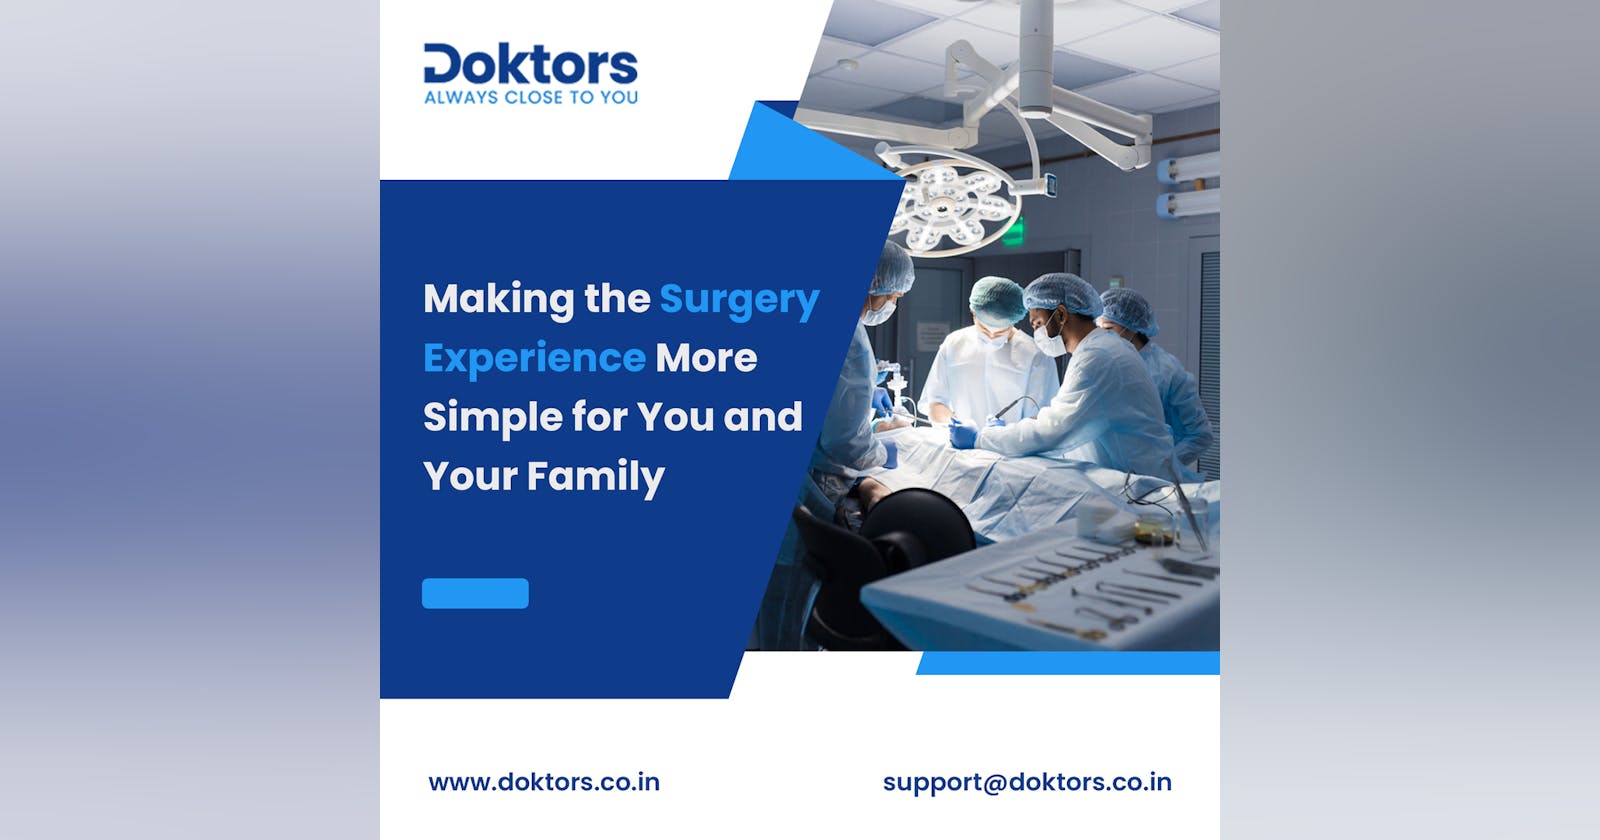 Making the Surgery Experience More Simple for You and Your Family